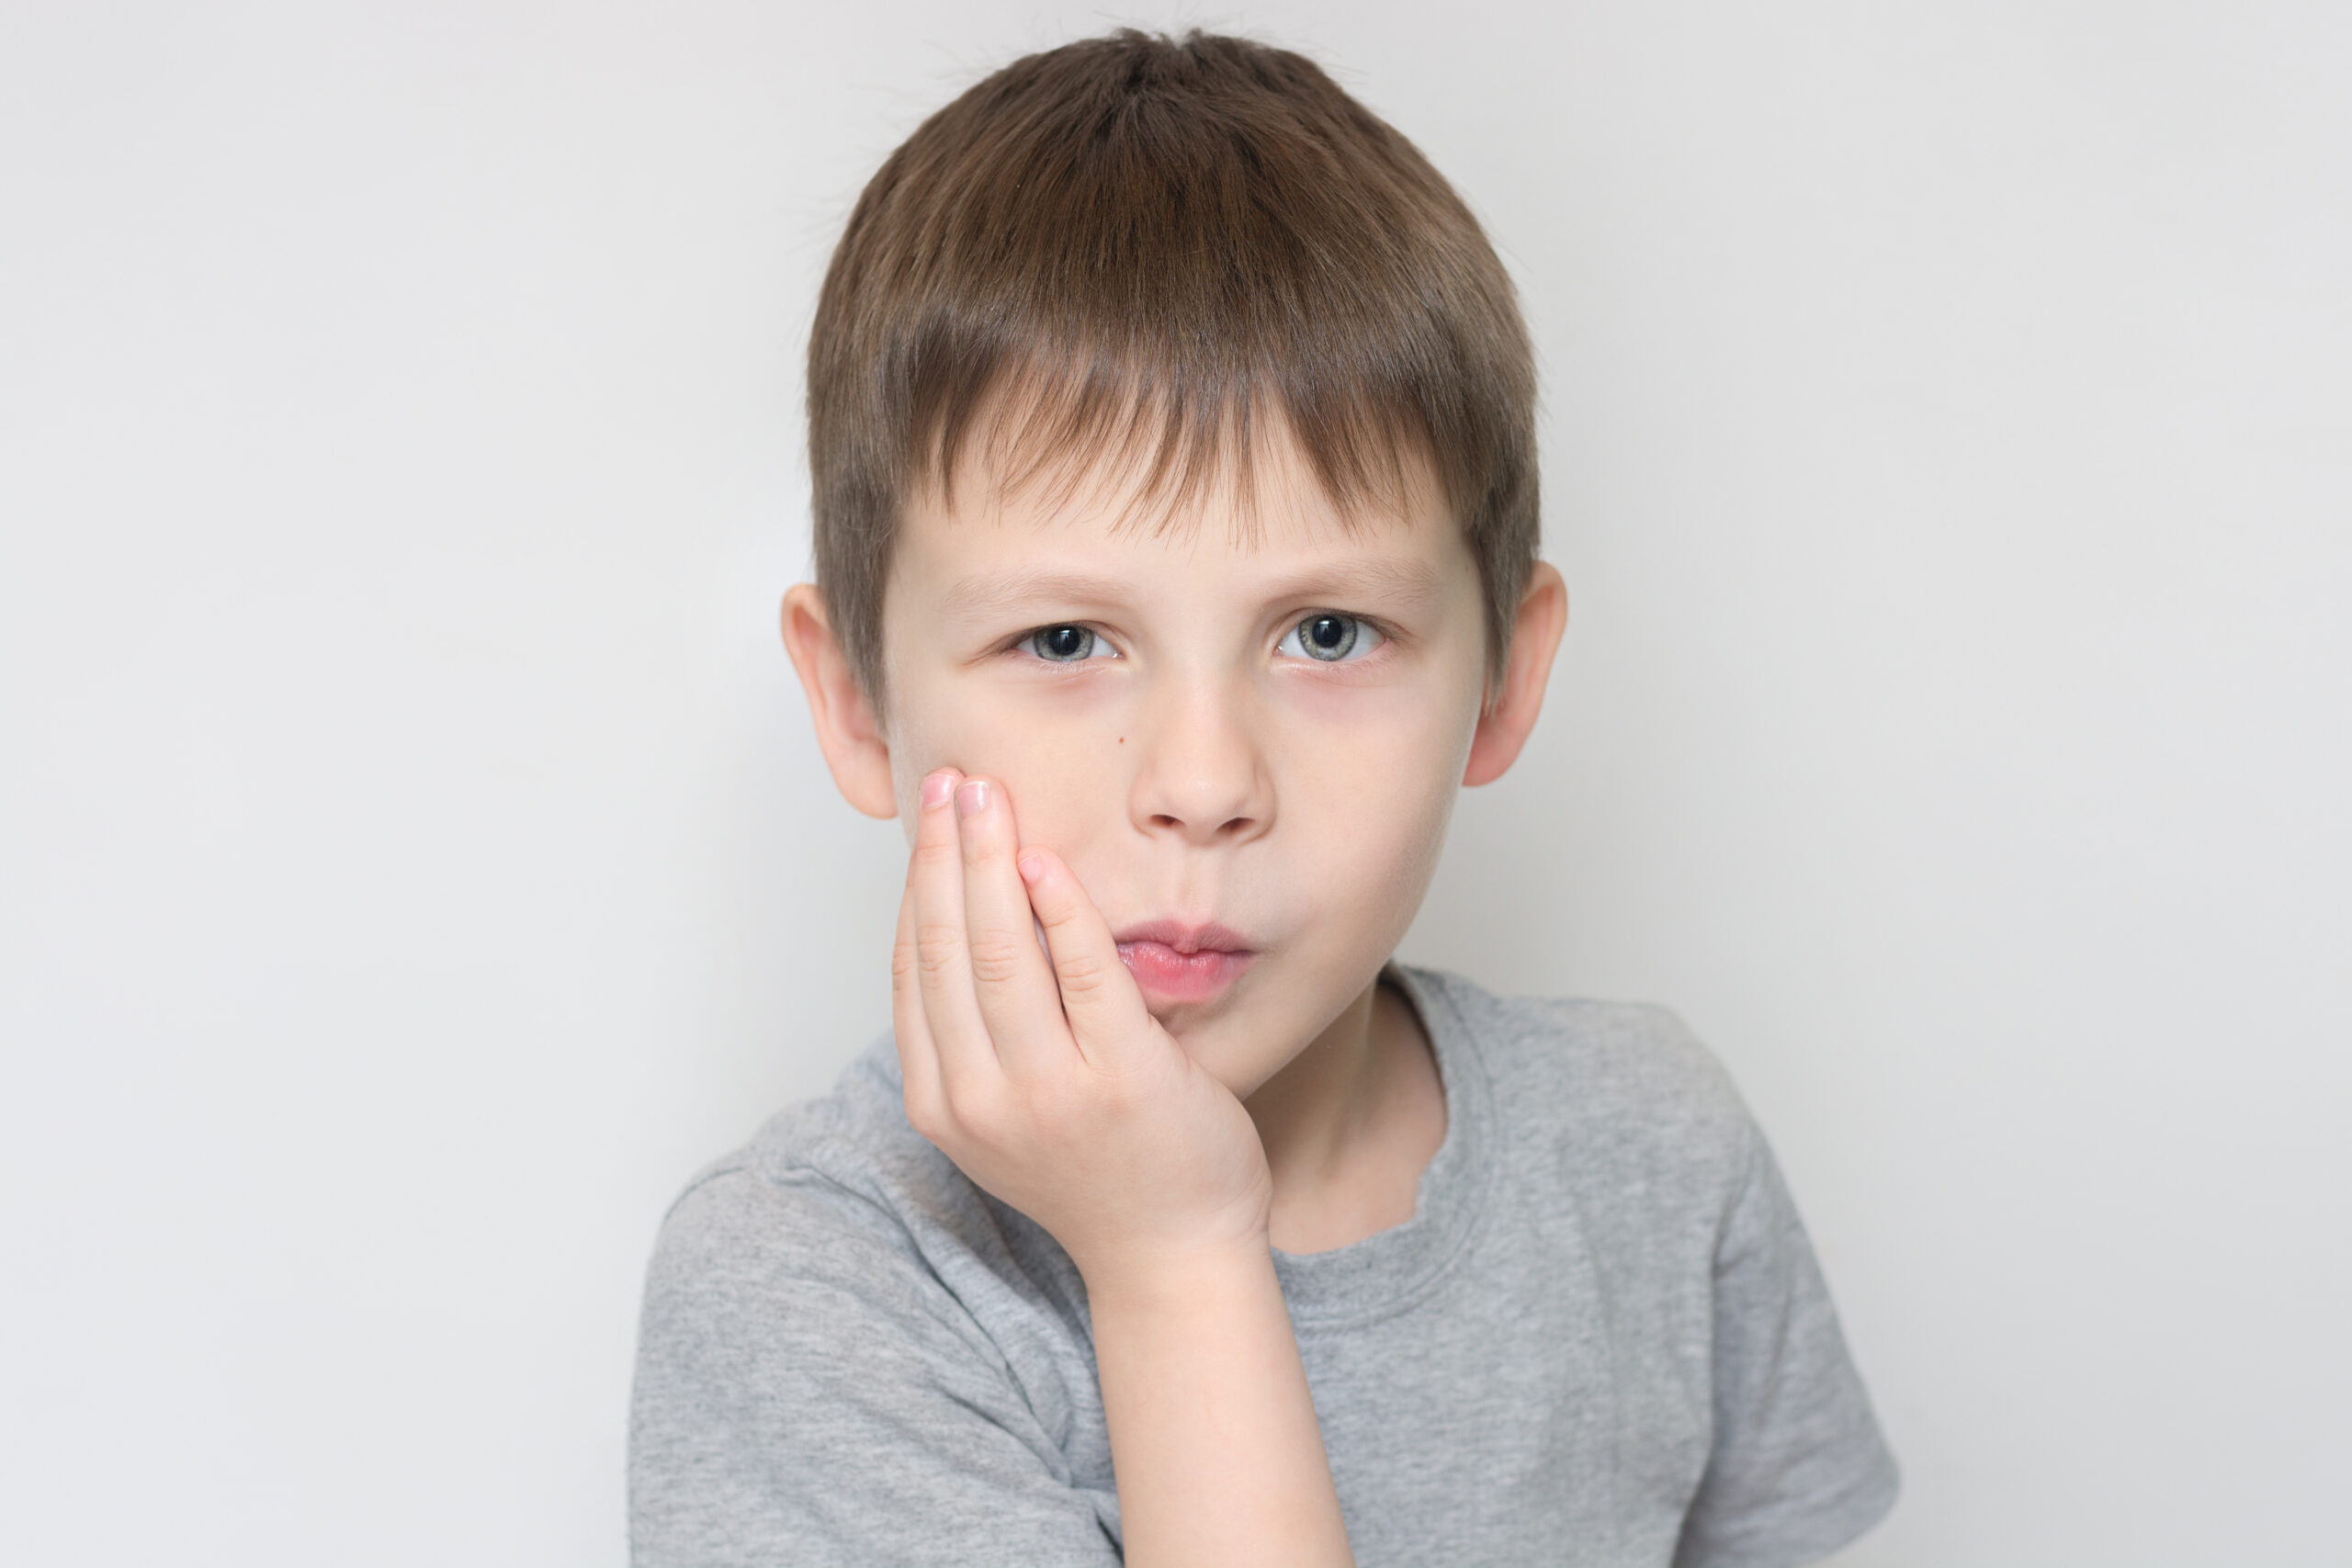 the child holds his cheek with his hand, indicating that a tooth hurts. The boy looks at the camera, horizontal photo, portrait. Unhappy preschooler with toothache